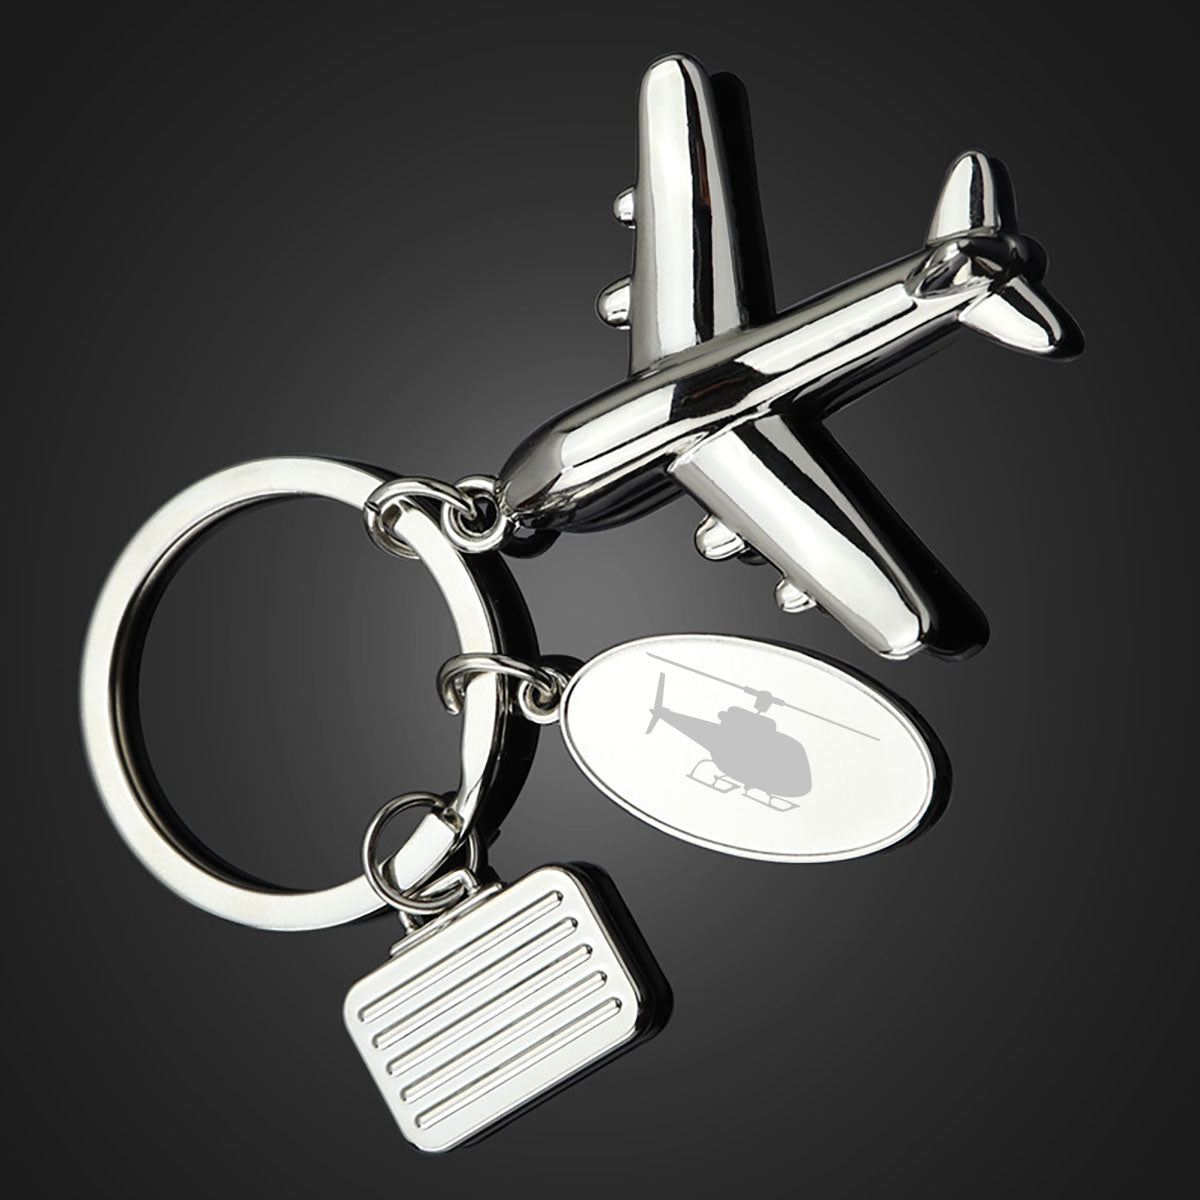 Helicopter Designed Suitcase Airplane Key Chains